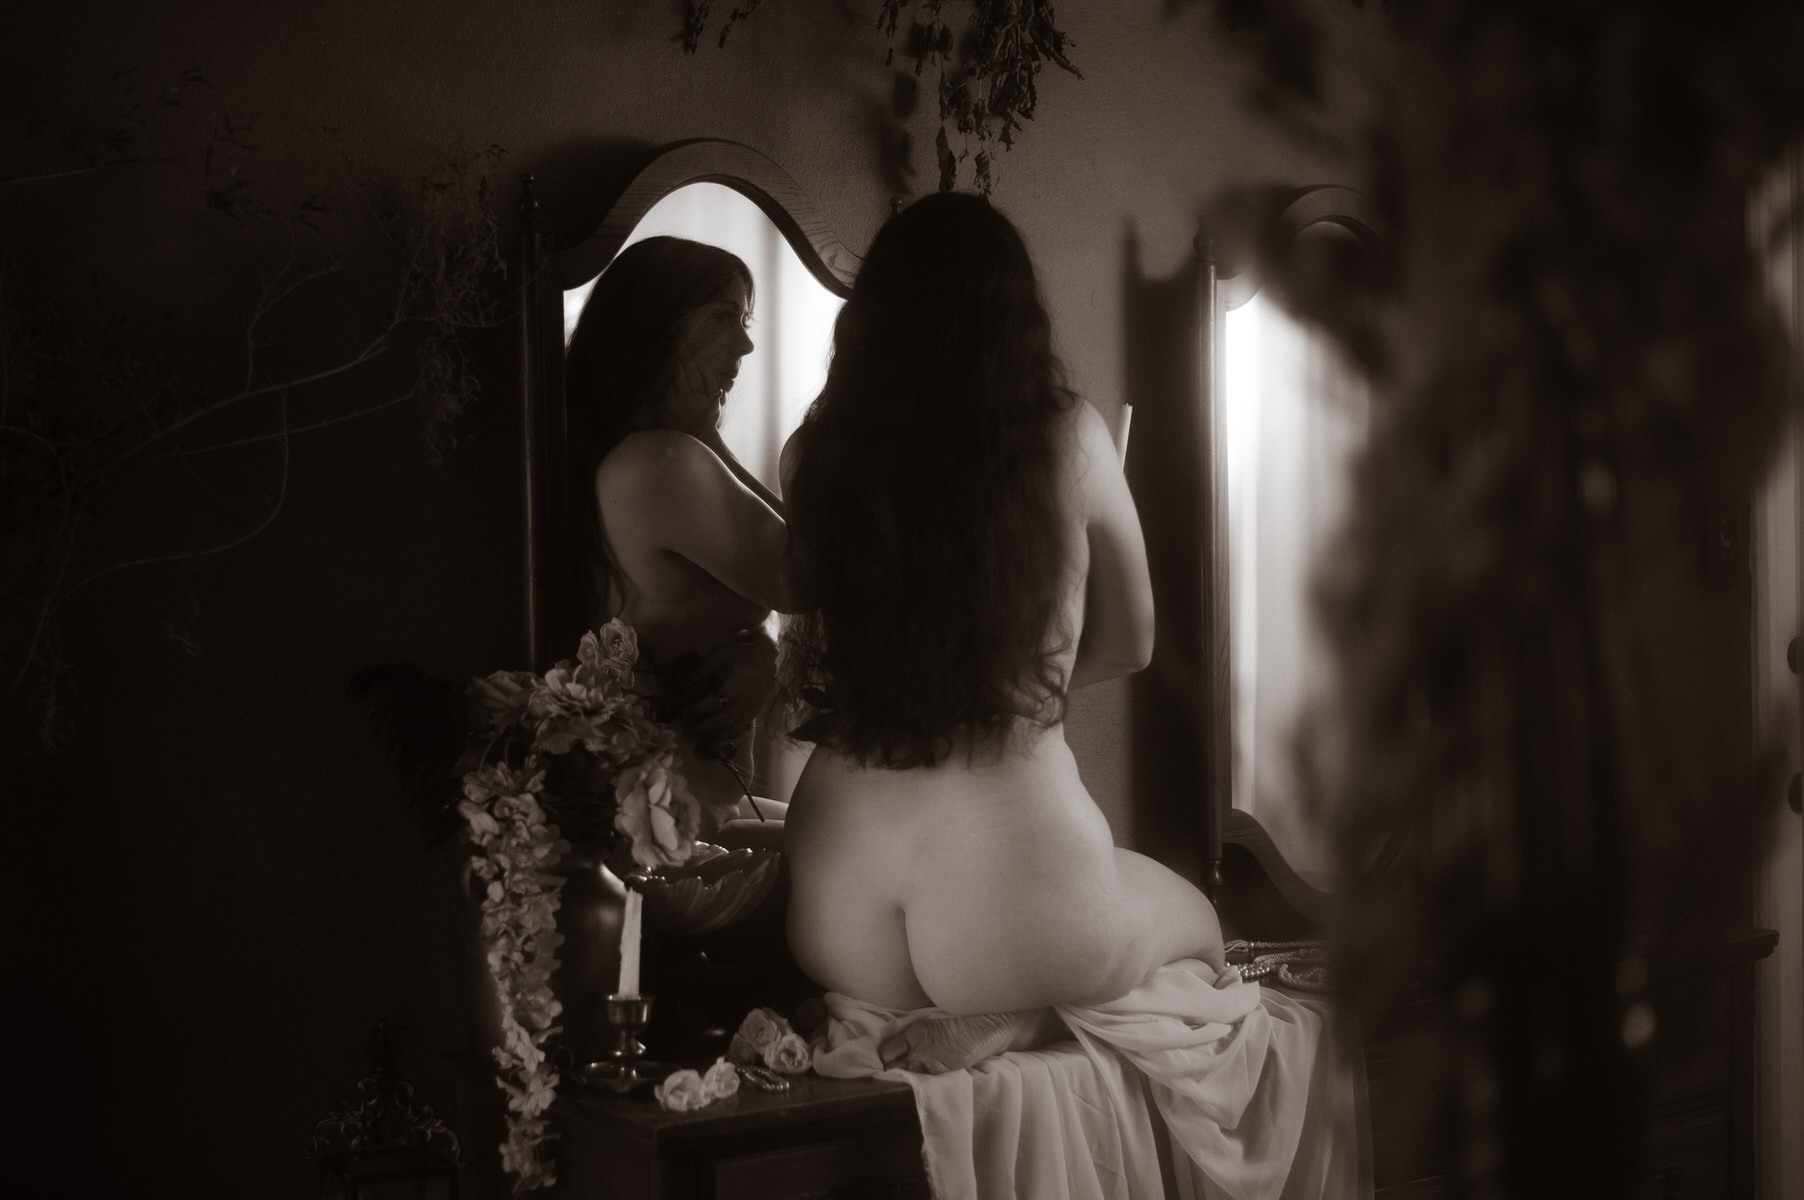 A fine art nude woman is sitting in front of a mirror.